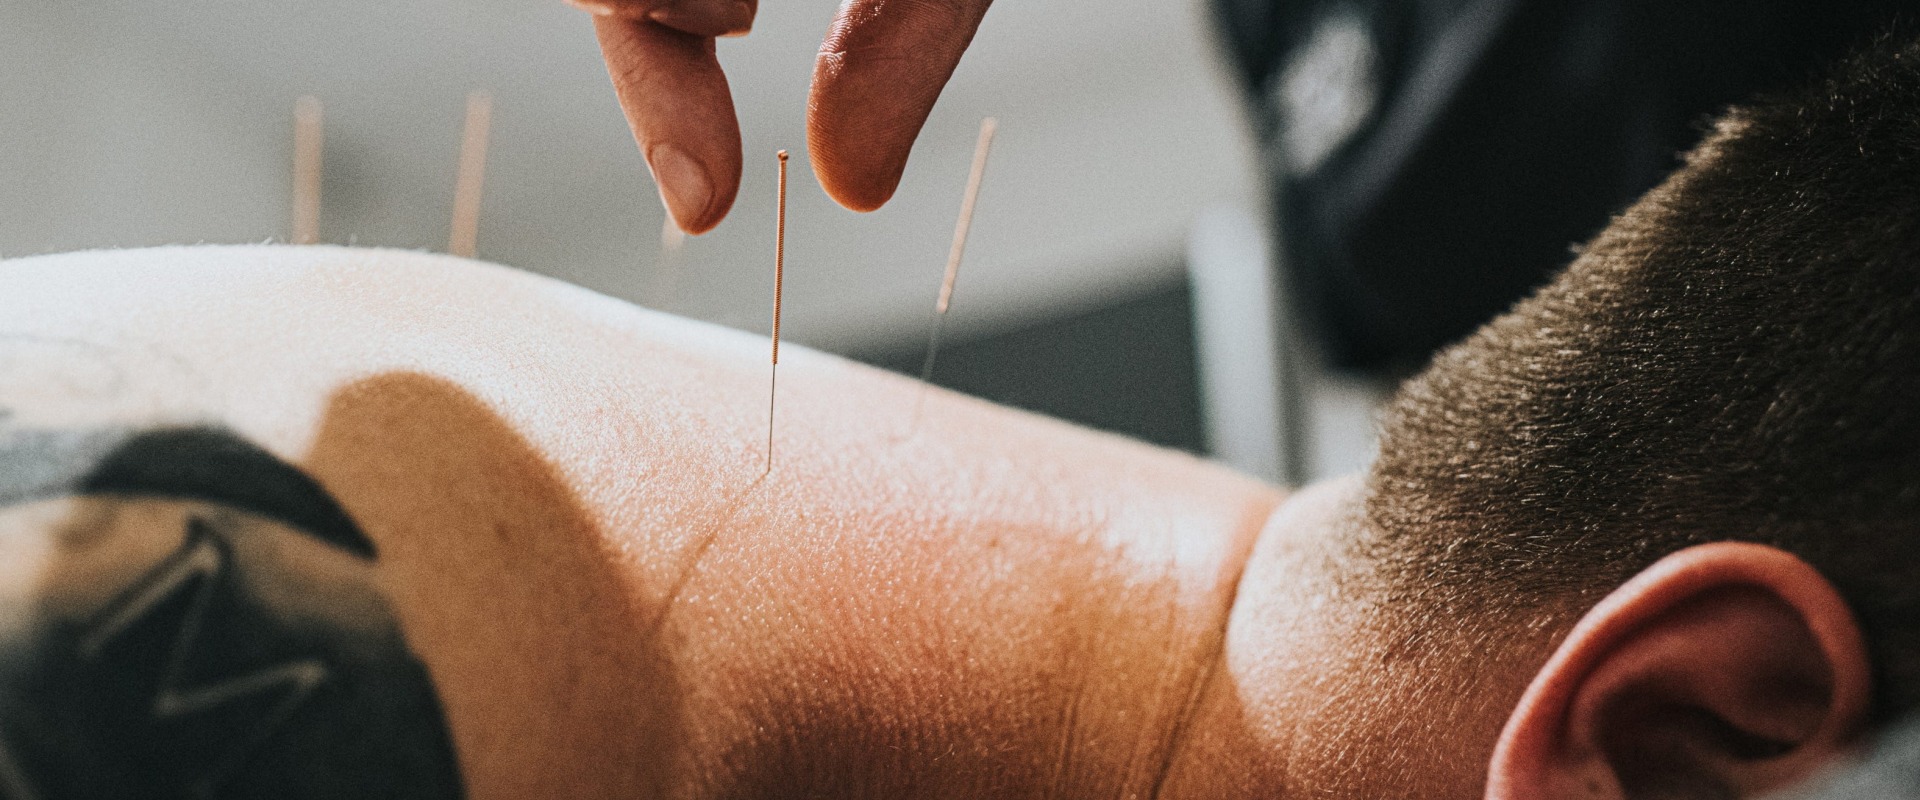 Finding a Qualified Acupuncturist: What You Need to Know